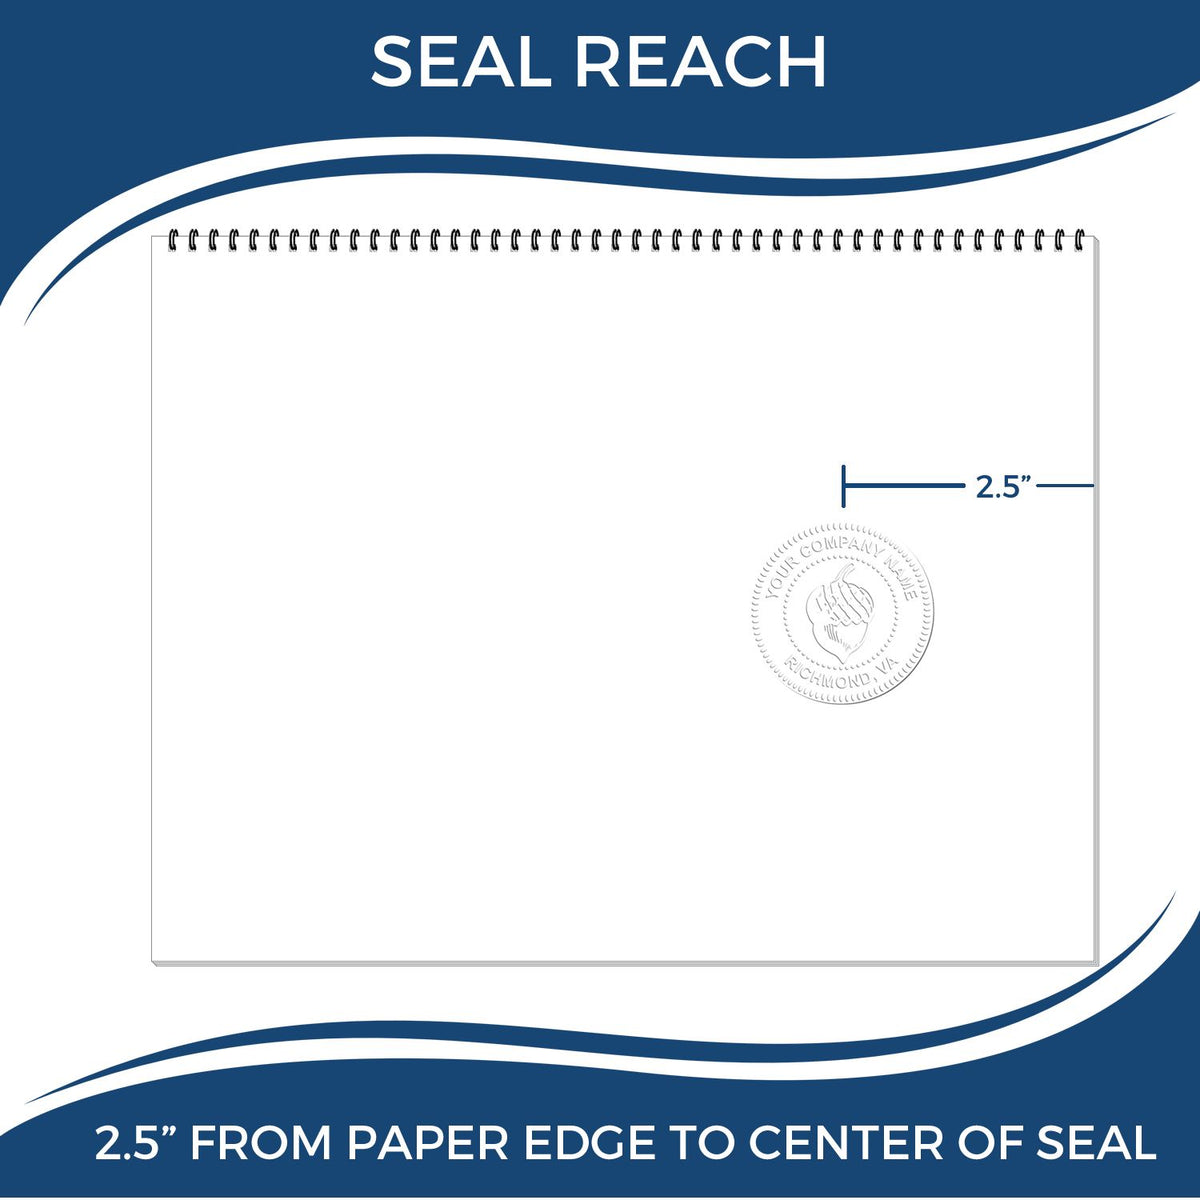 An infographic showing the seal reach which is represented by a ruler and a miniature seal image of the Long Reach Nebraska Geology Seal